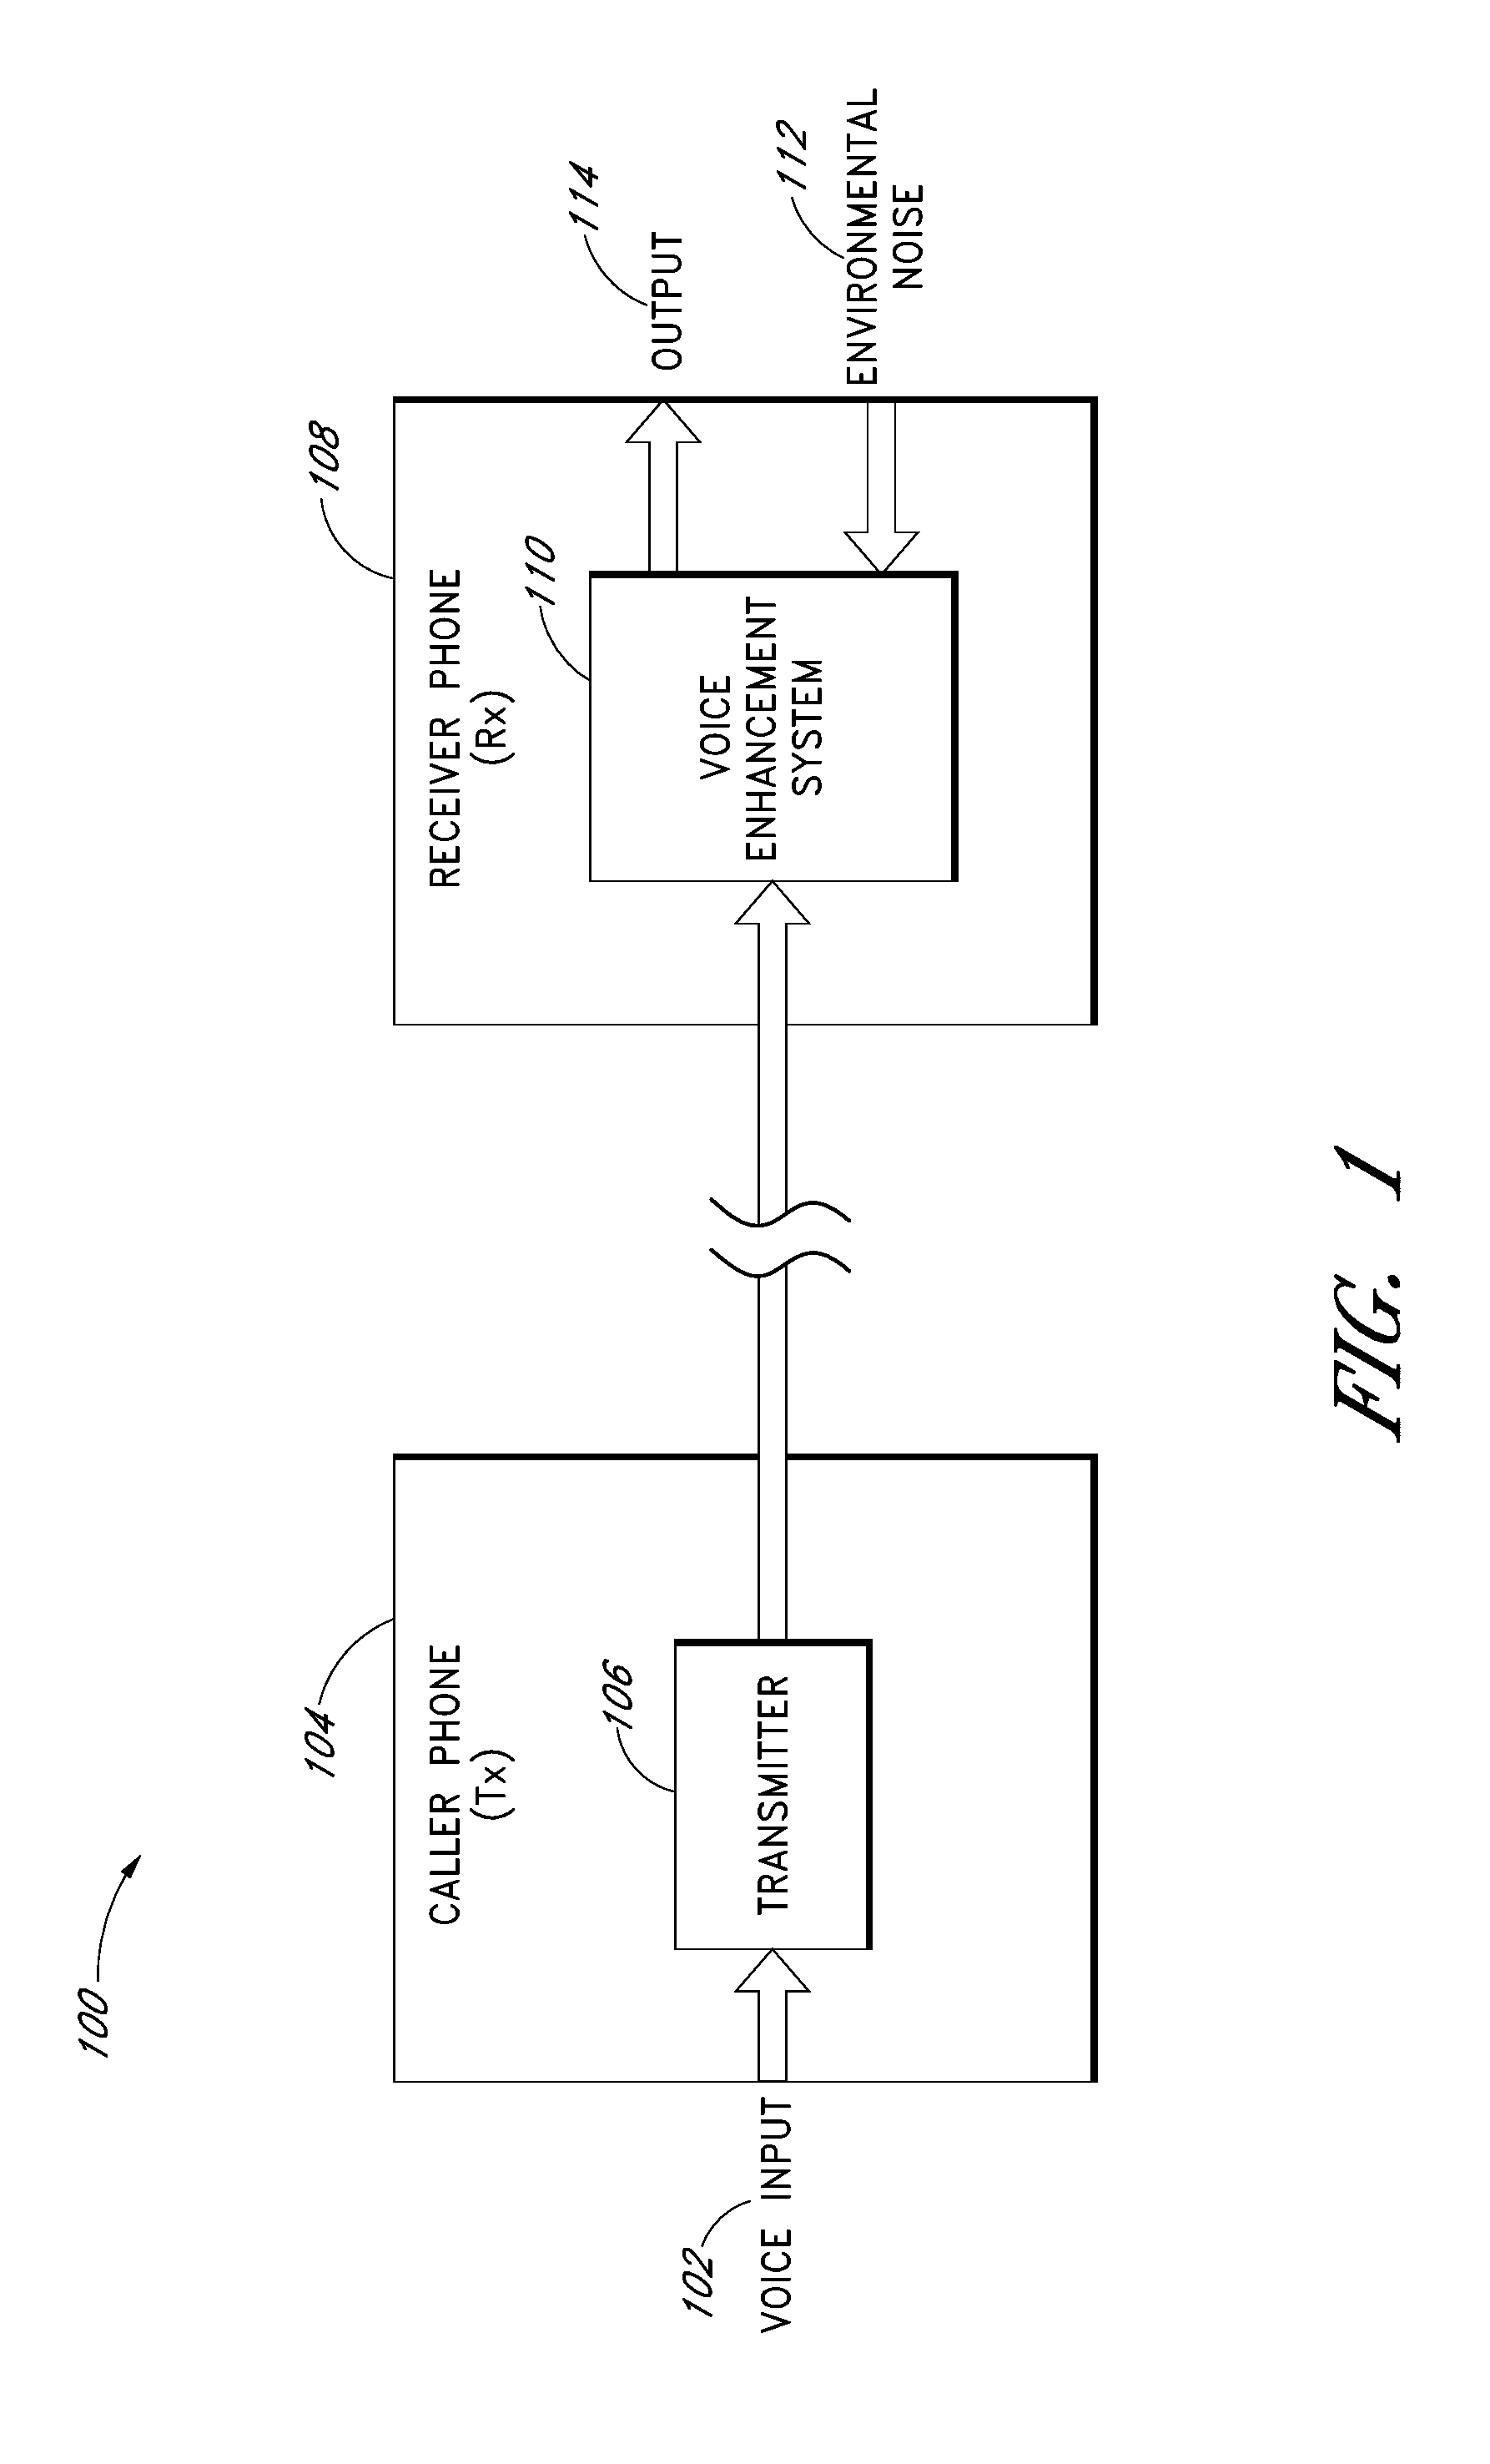 System for processing an audio signal to enhance speech intelligibility